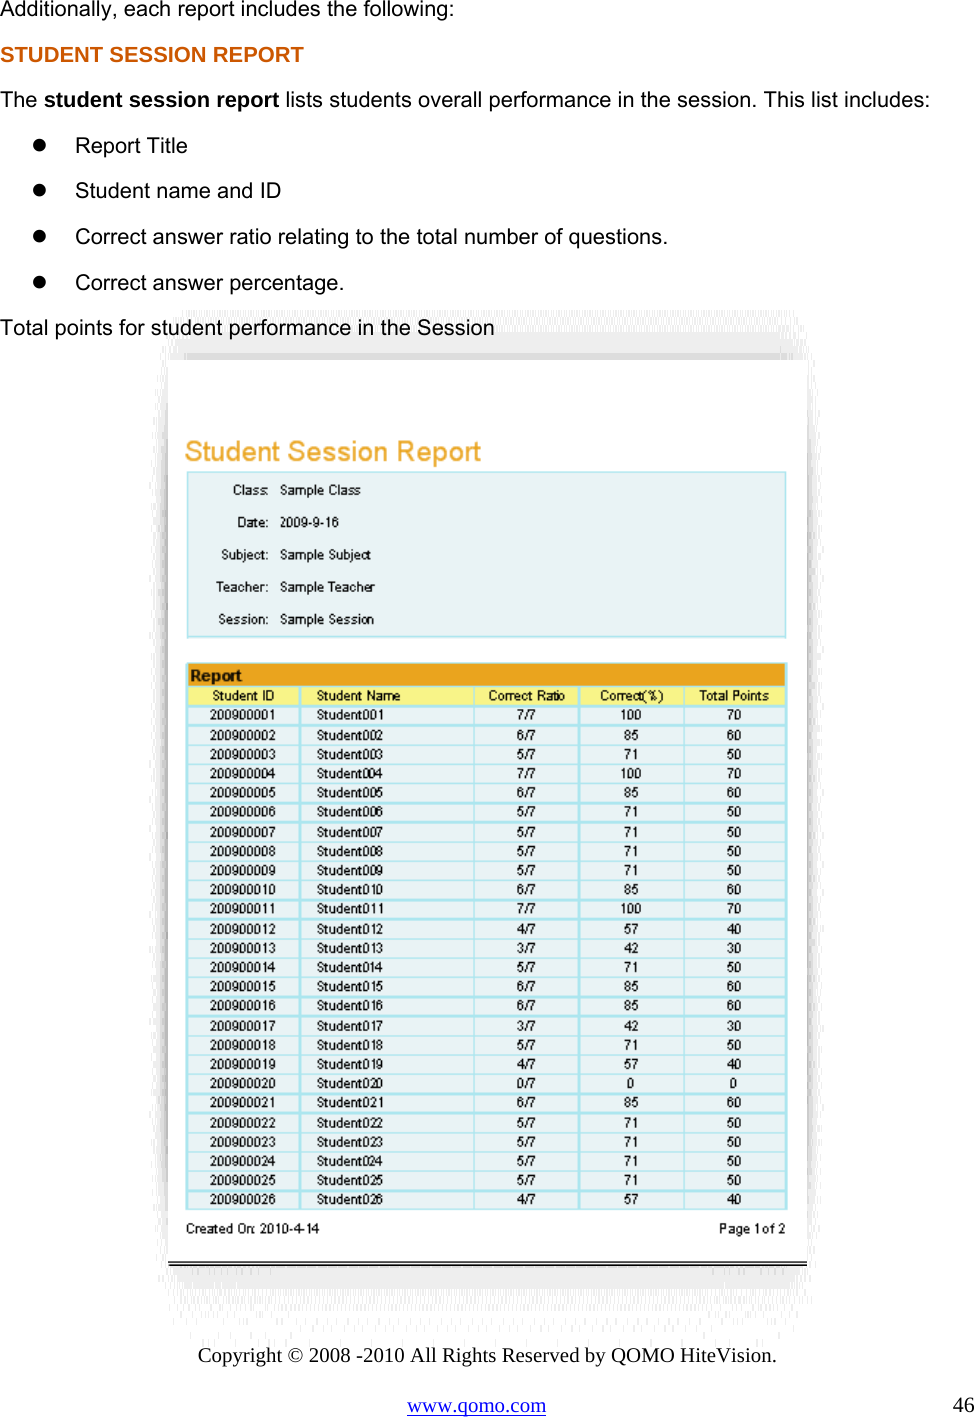 Copyright © 2008 -2010 All Rights Reserved by QOMO HiteVision. www.qomo.com                                                                          46 Additionally, each report includes the following:  STUDENT SESSION REPORT The student session report lists students overall performance in the session. This list includes:   Report Title   Student name and ID   Correct answer ratio relating to the total number of questions.    Correct answer percentage. Total points for student performance in the Session   